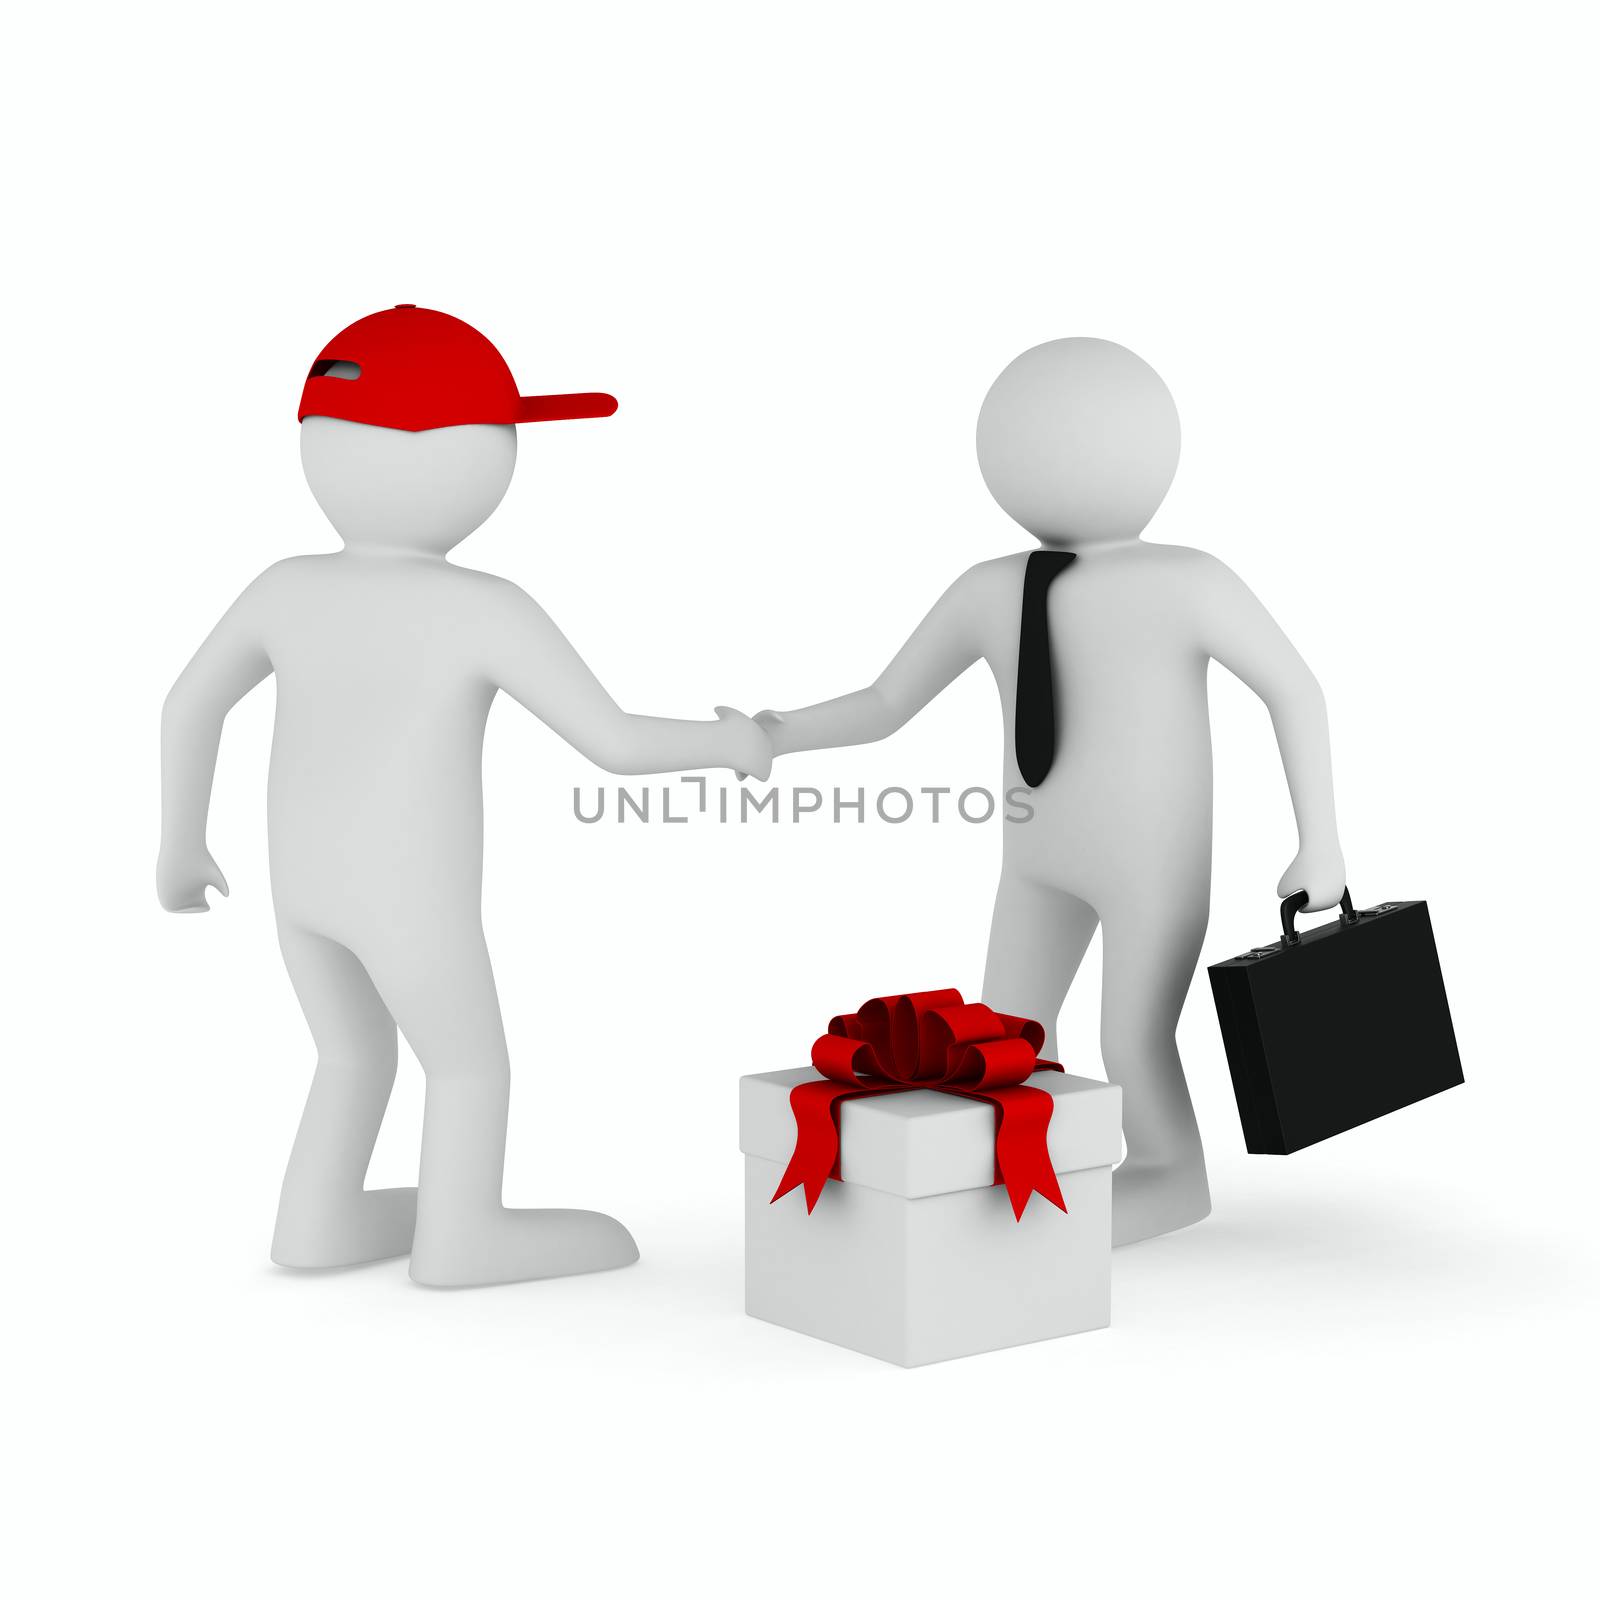 Goods delivery on white background. Isolated 3D image